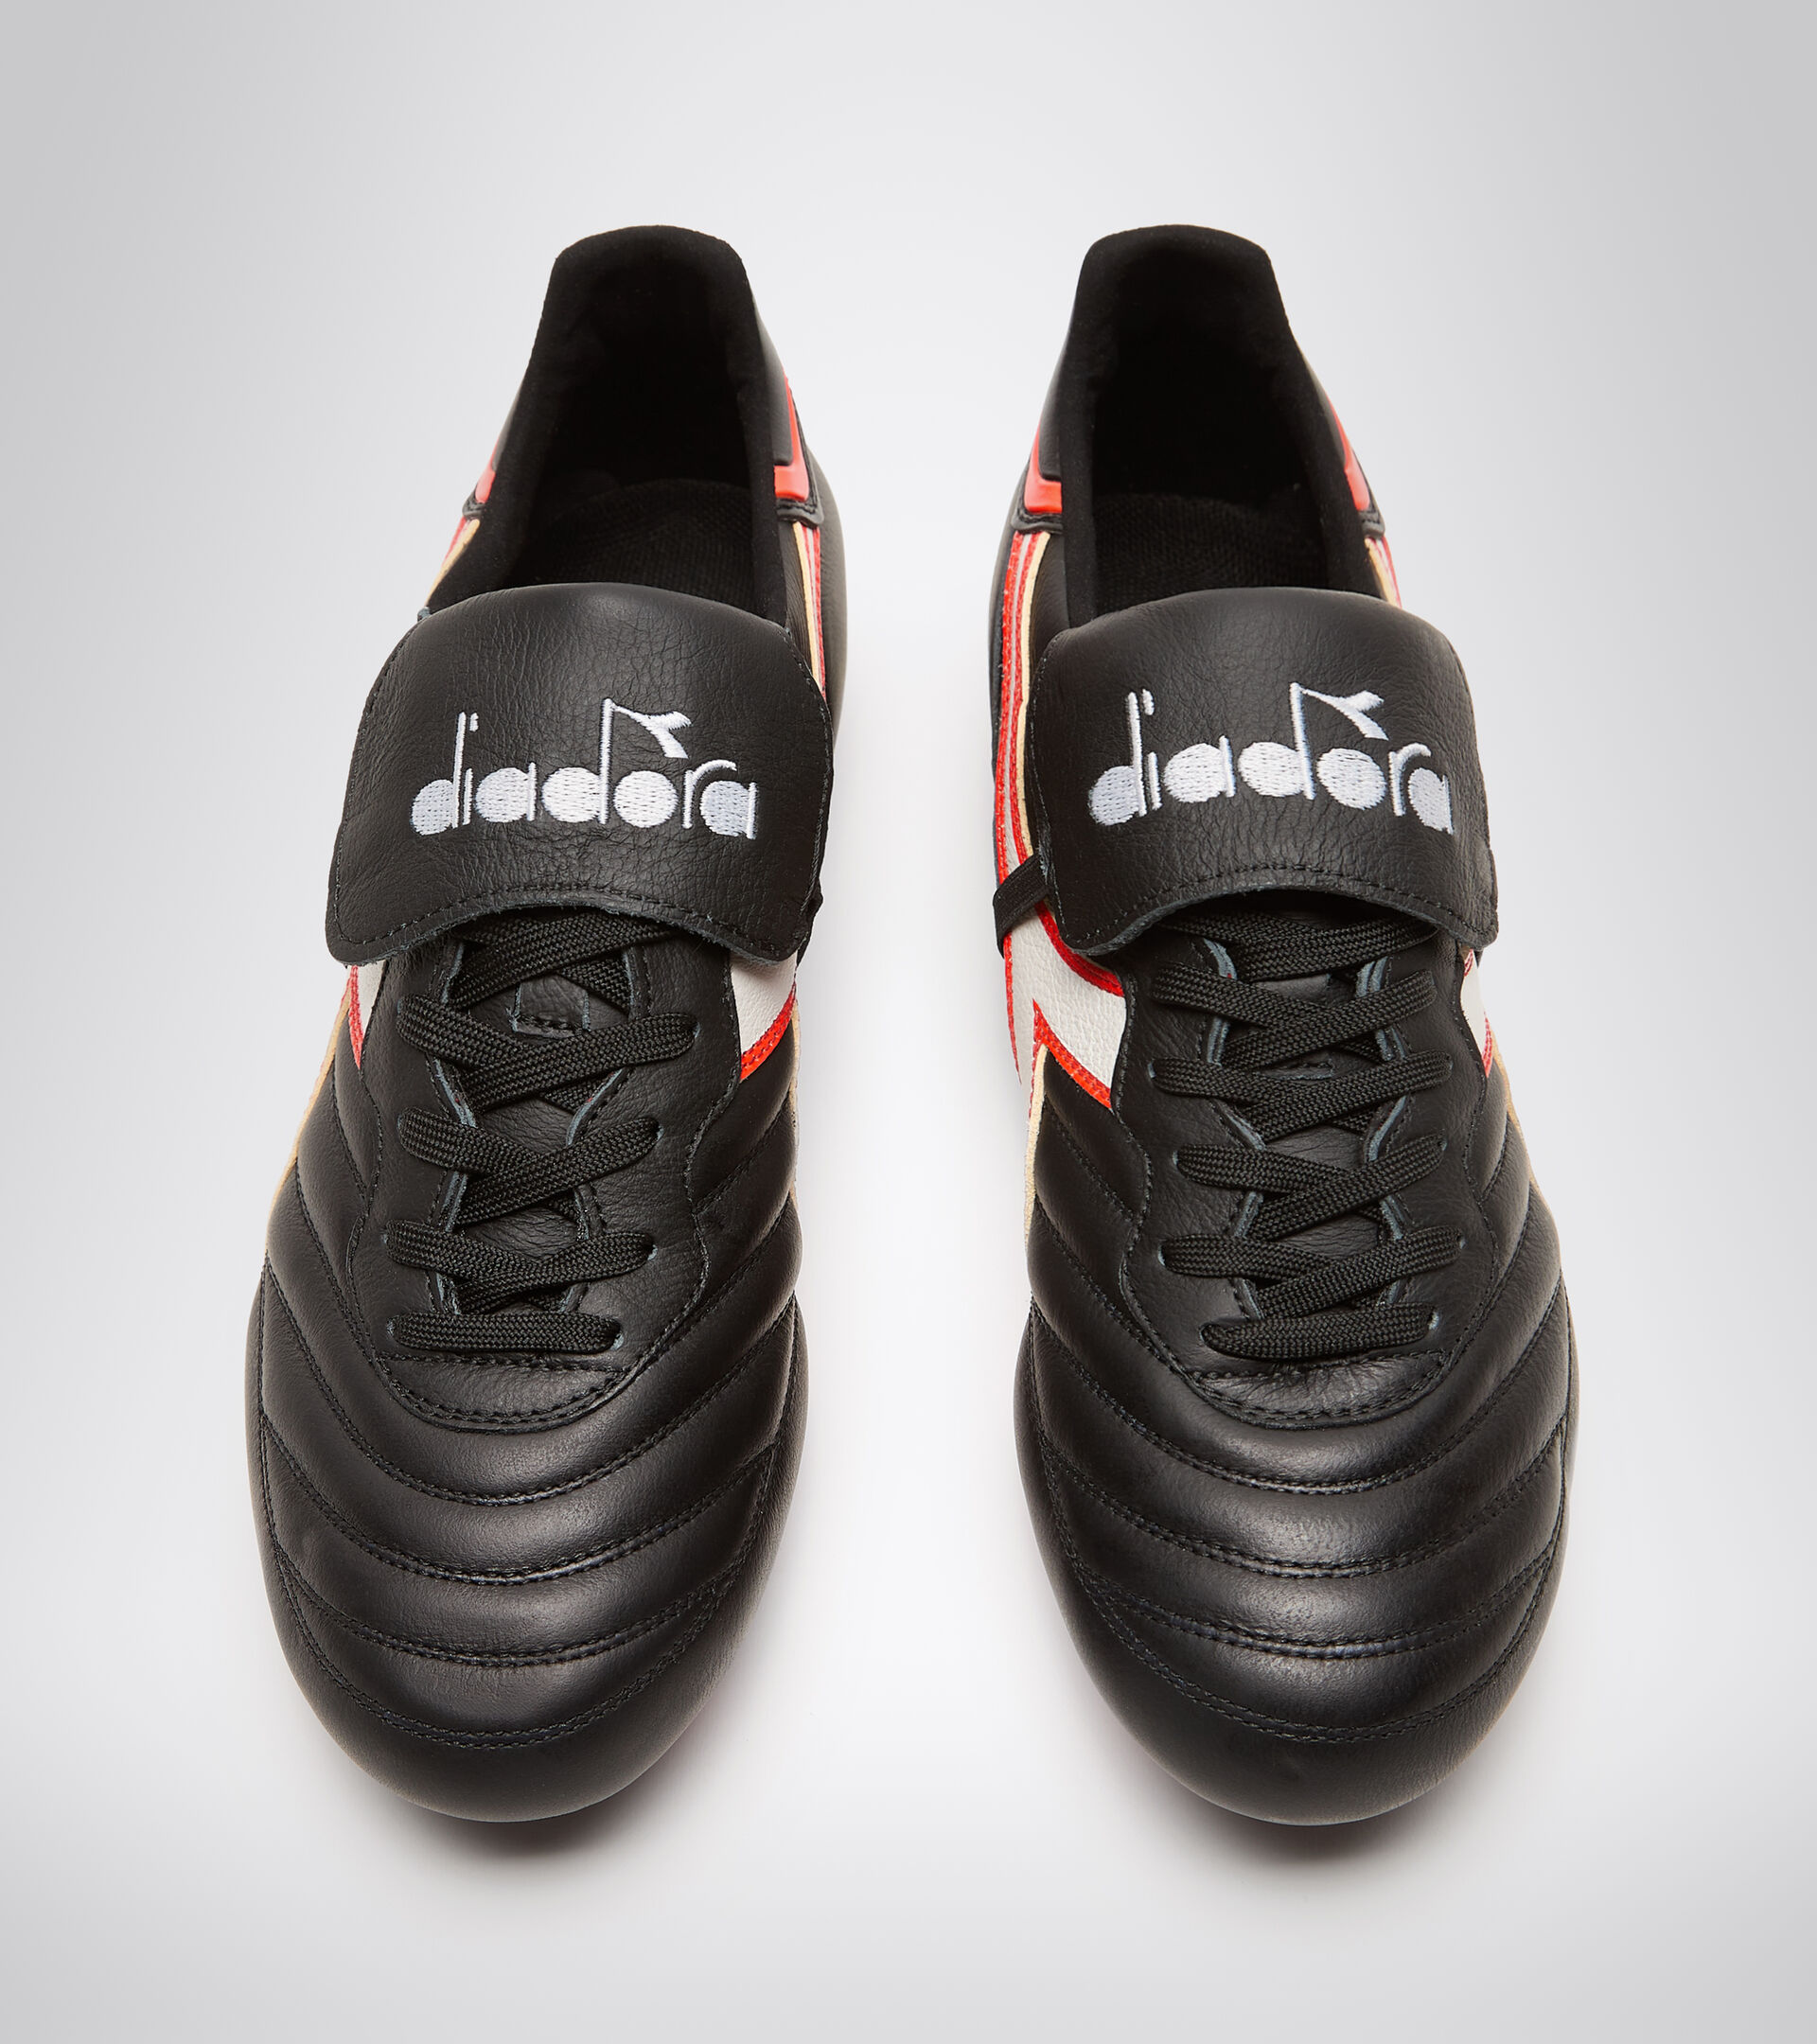 Firm ground football boots - Made in Italy BRASIL ITALY LT+ MDPU BLACK/WHITE/FLUO RED - Diadora